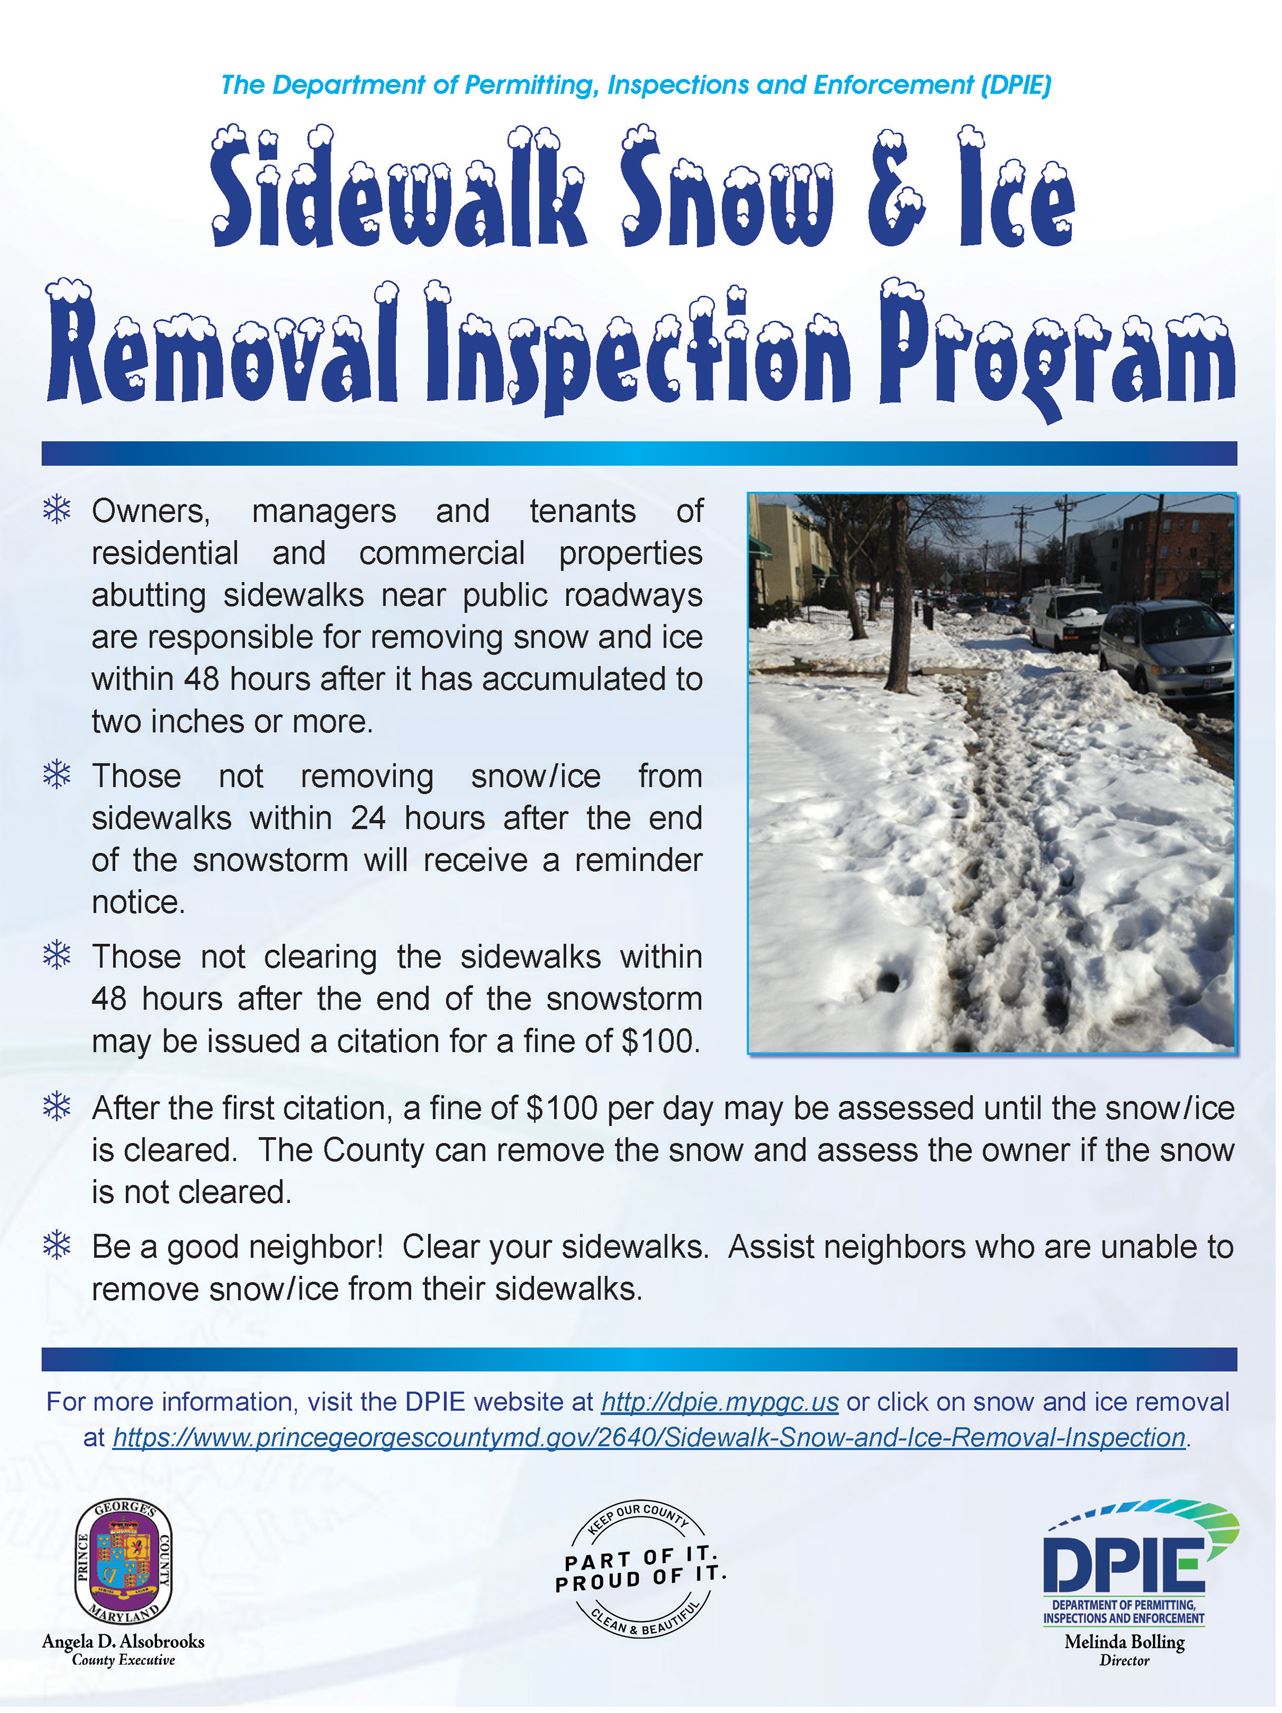 Sidewalk Snow and Ice Removal INSPECTIONS Program thumbnail